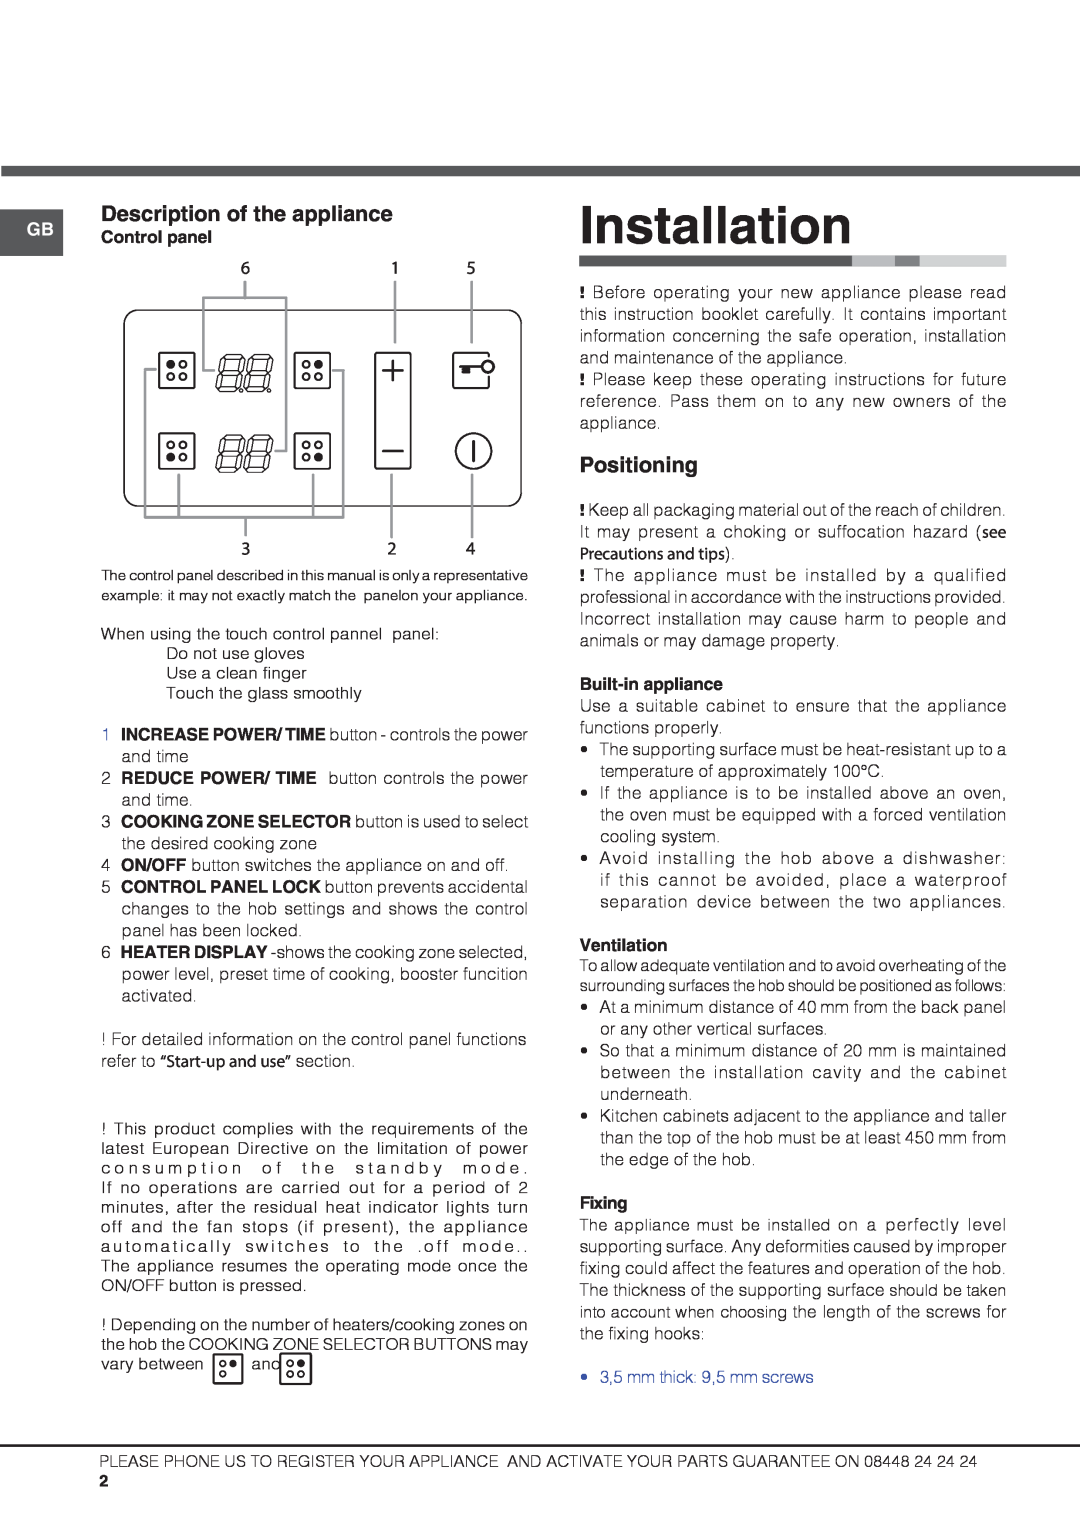 Hotpoint CIB 644 C E Installation, Description of the appliance, Positioning, Control panel, Built-in appliance, Fixing 